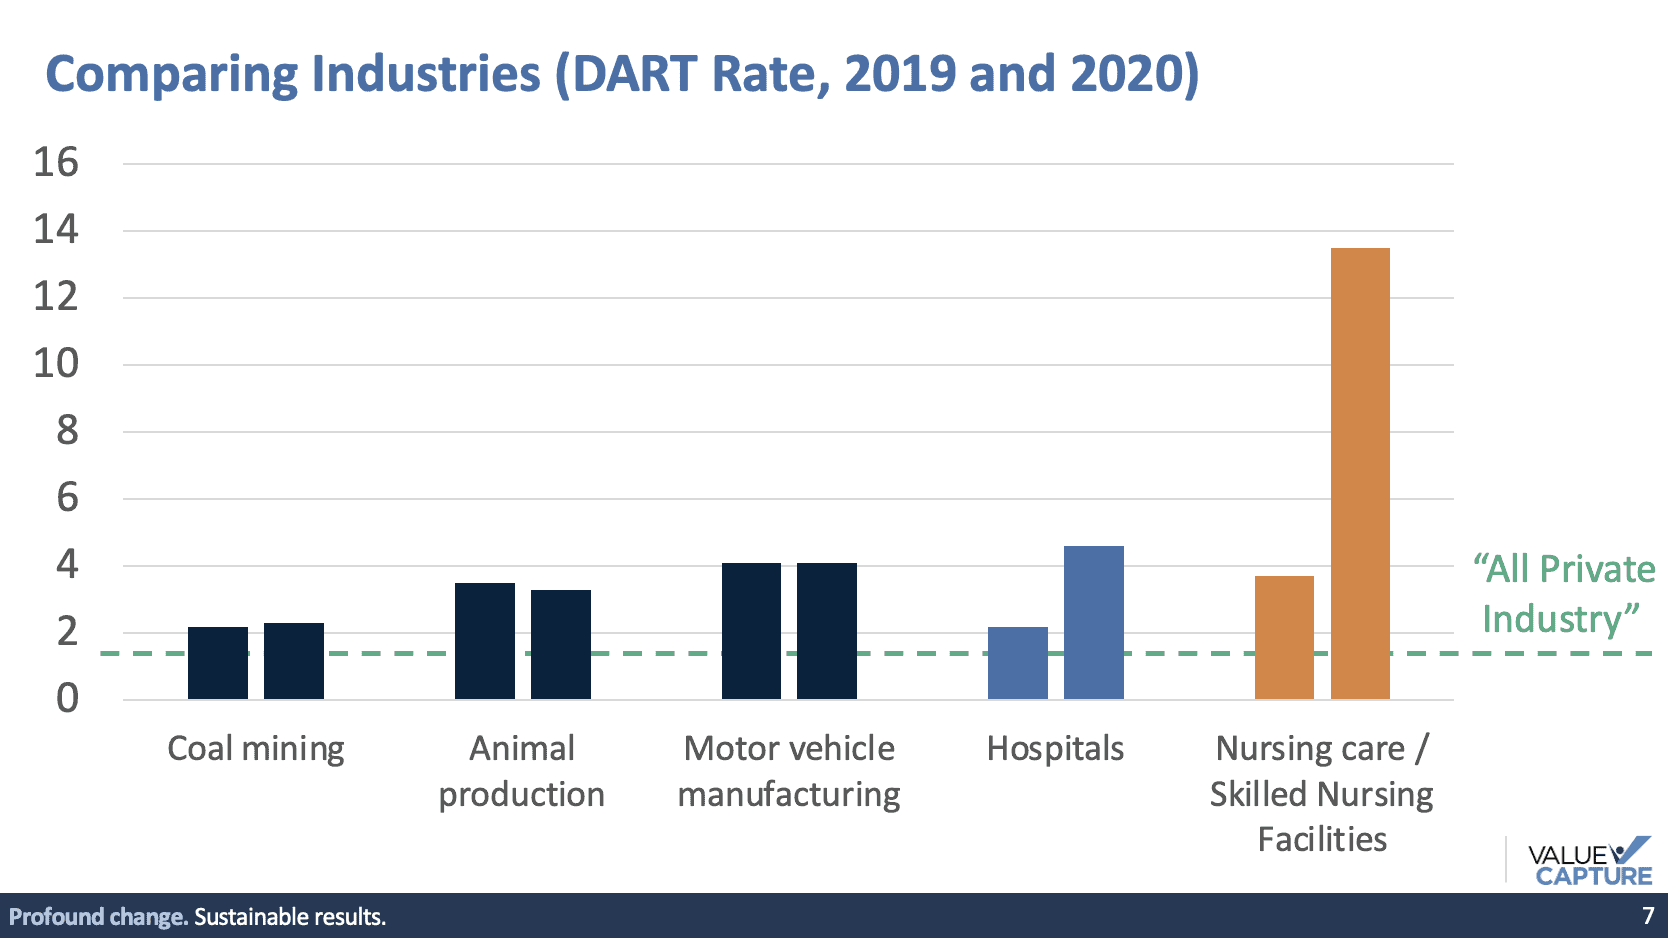 DART rates 2019 and 2020 for coal mining, animal production, hospitals, and nursing care / SNF